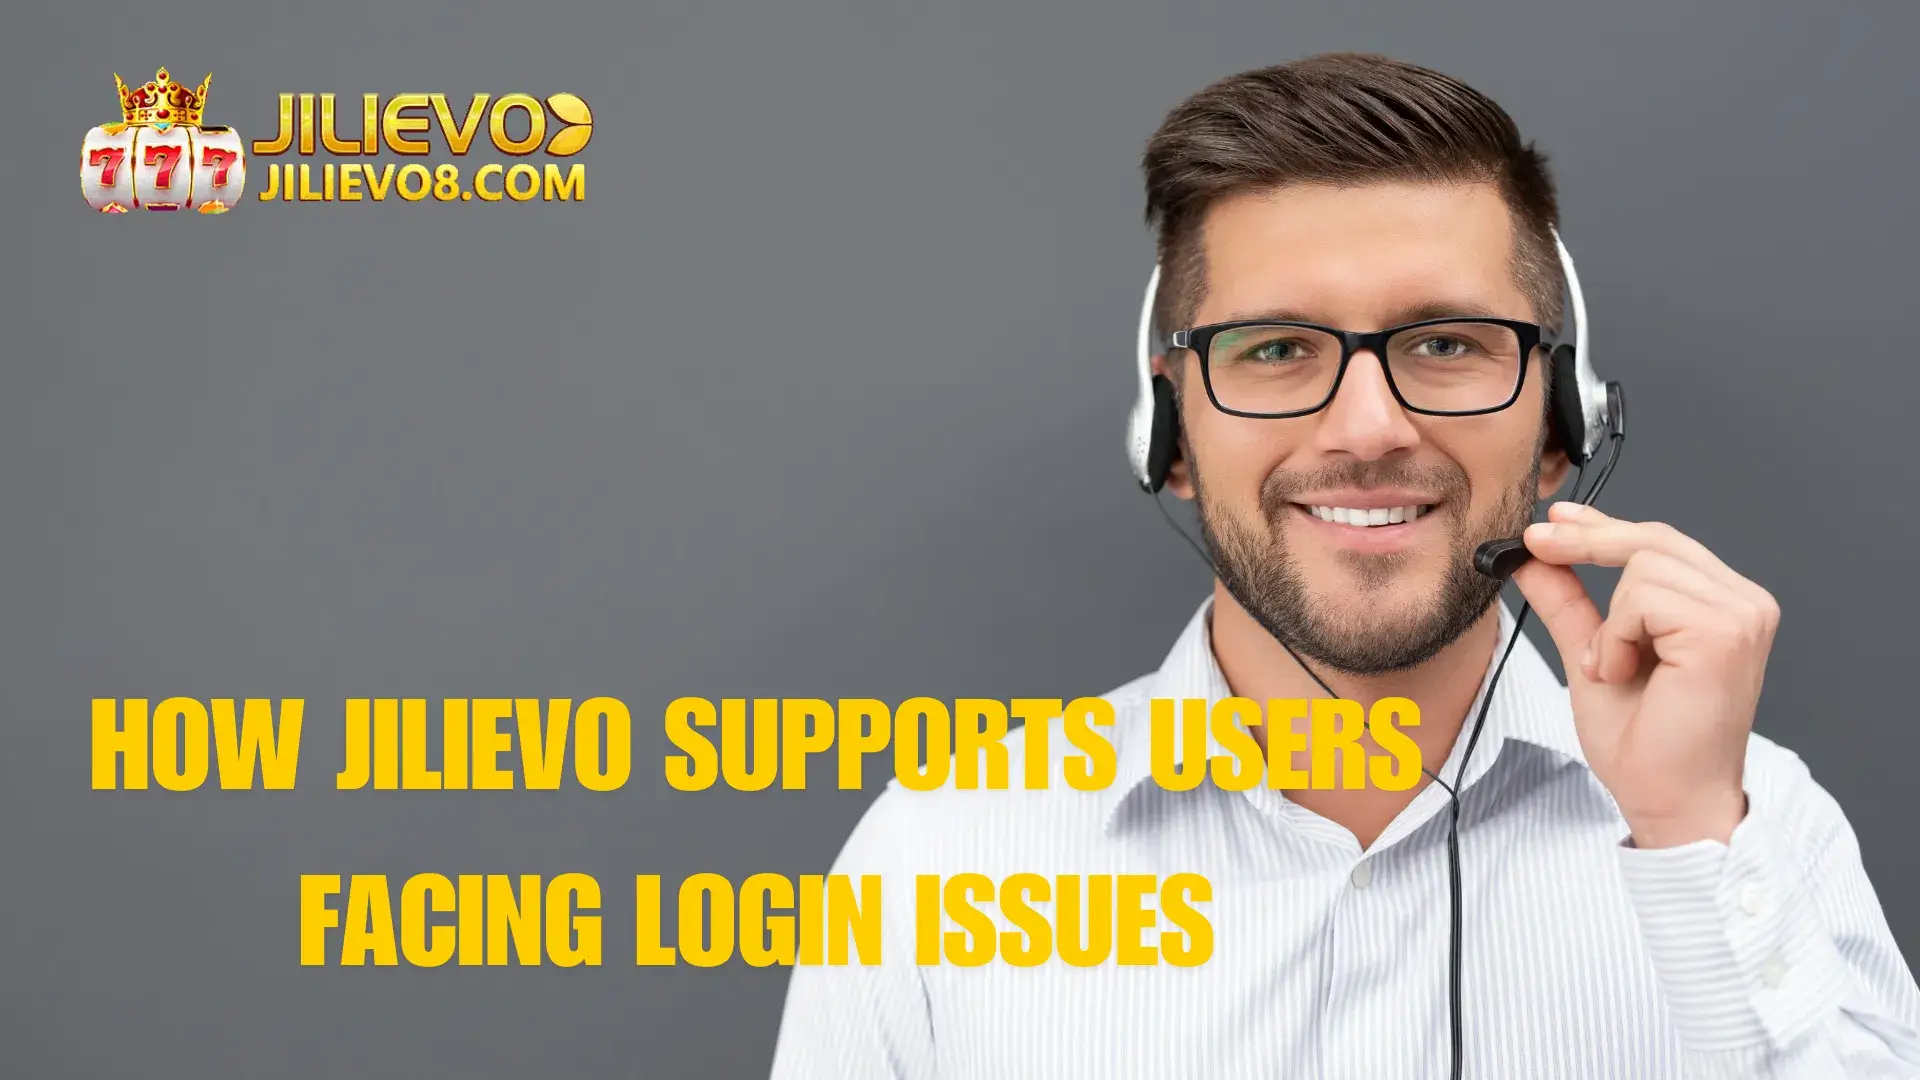 How Jilievo Supports Users Facing Login Issues